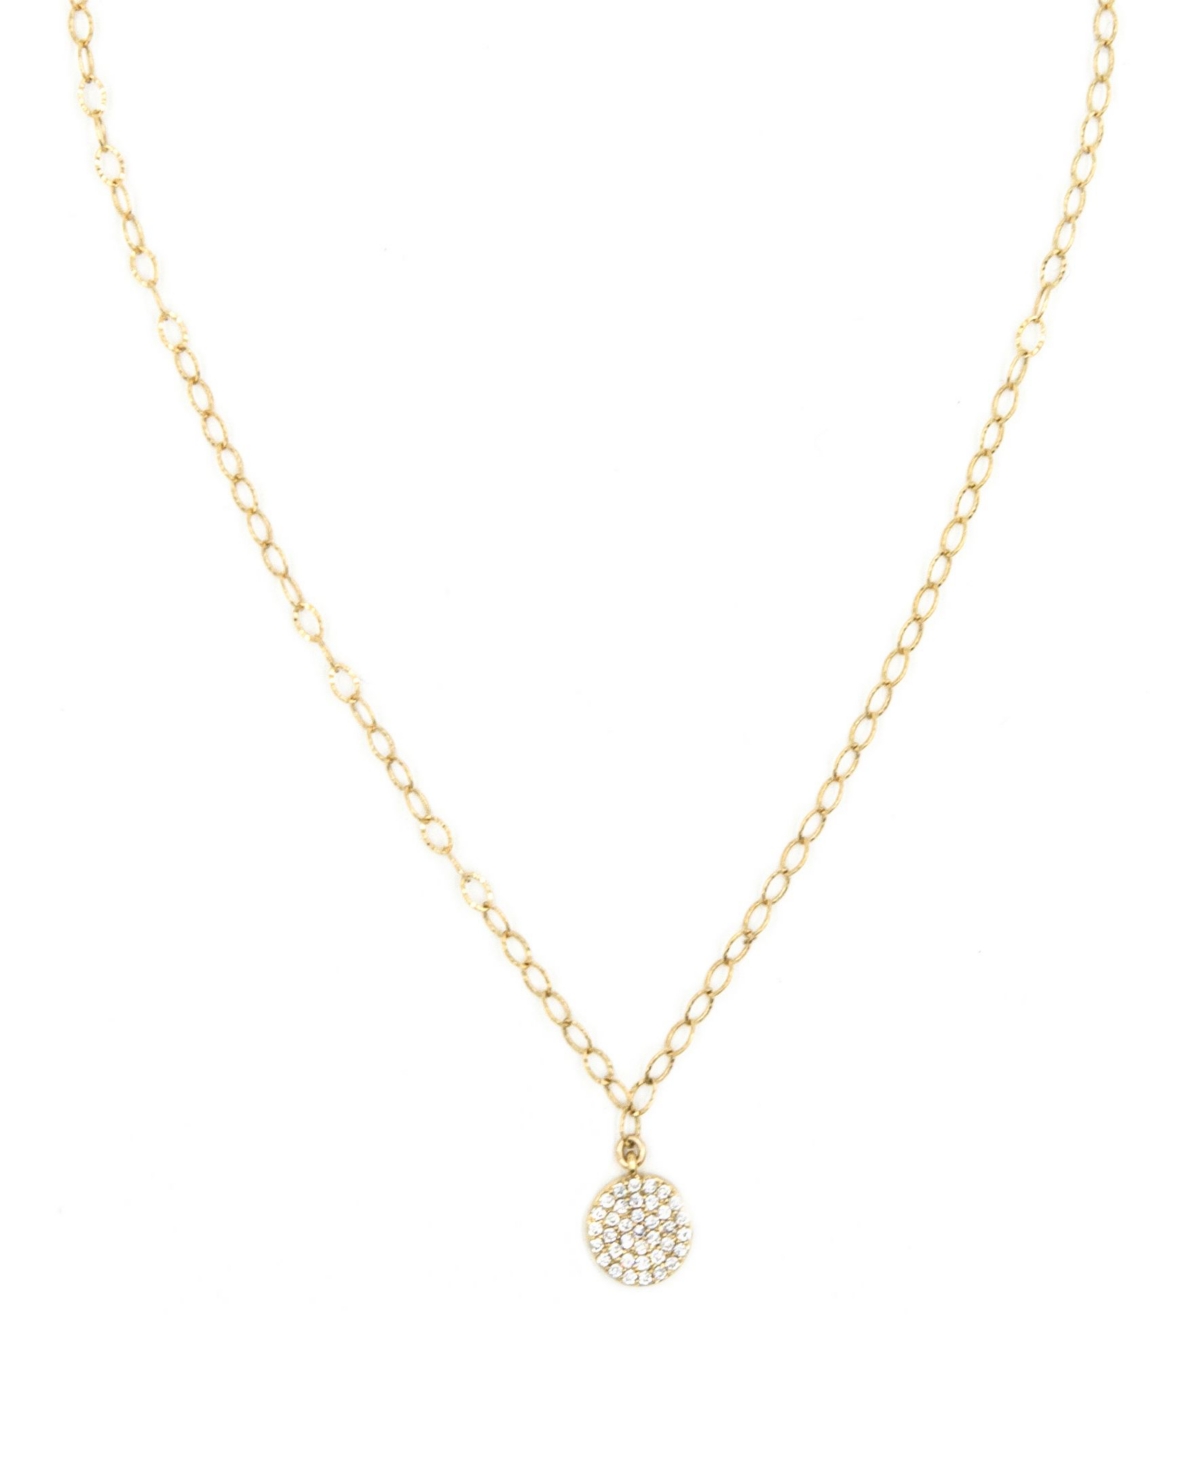 14k Gold Filled Pave Disk Charm On Chain - Clear Quartz